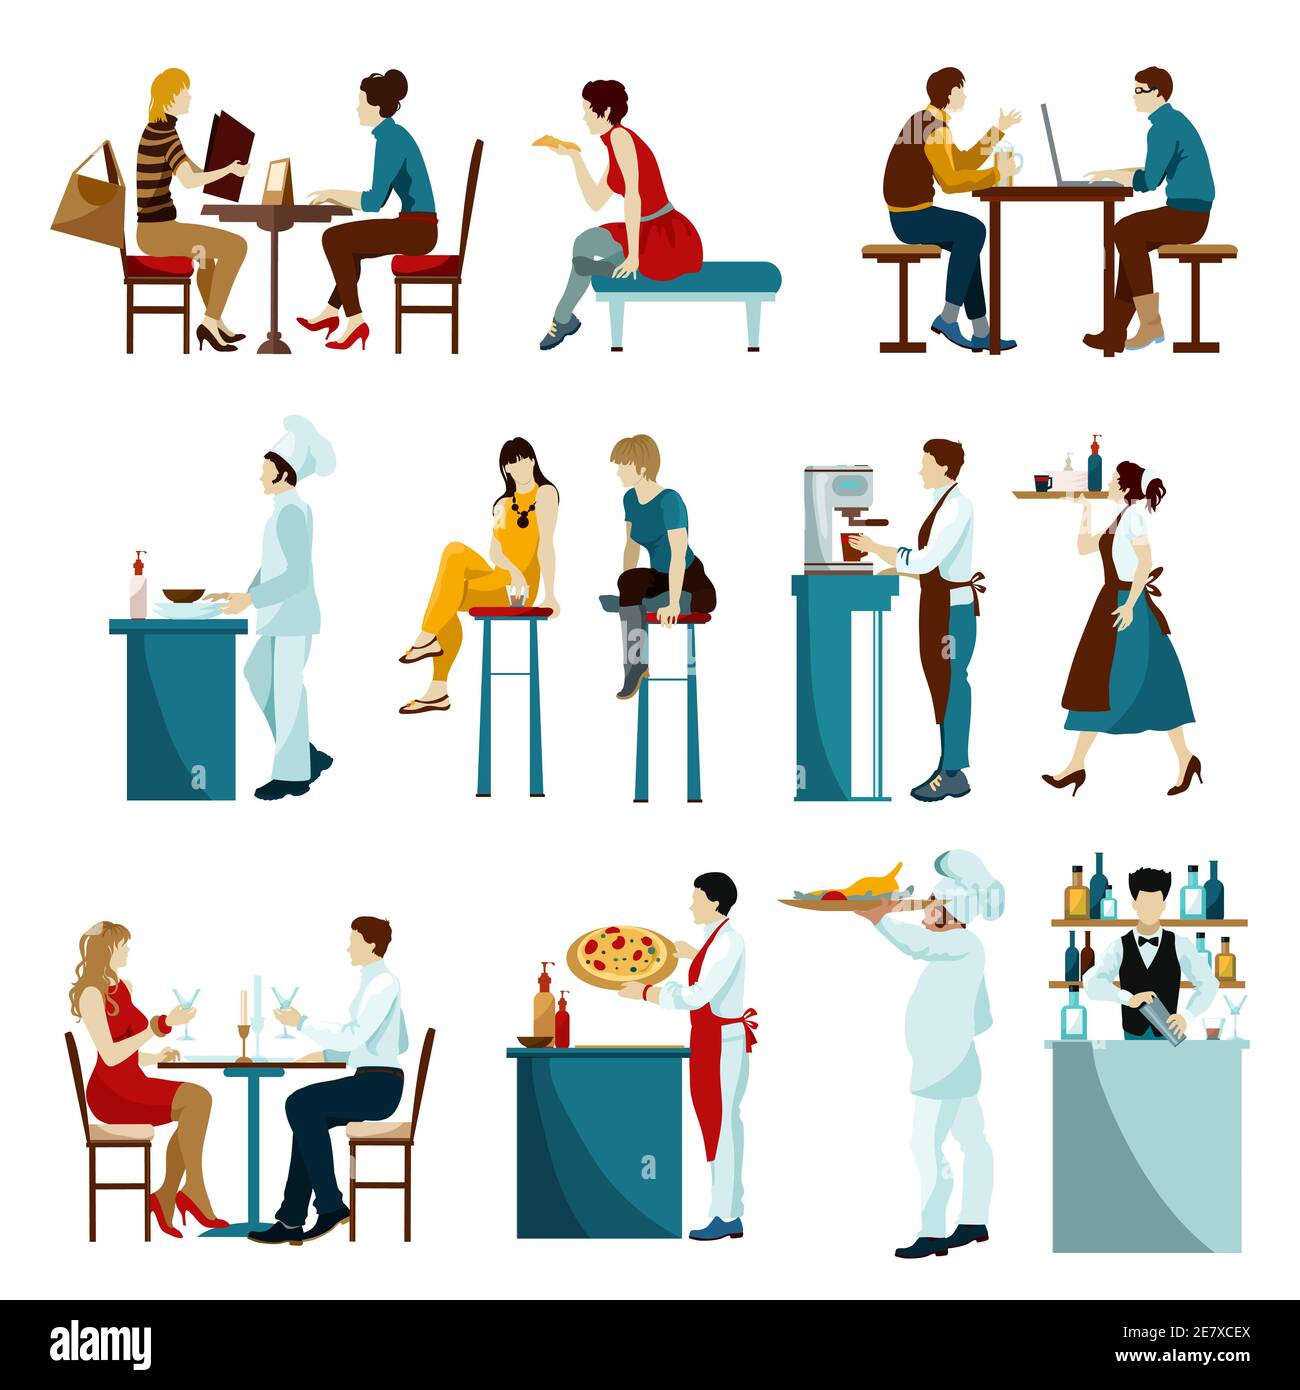 Cafe restaurant daytime visitors flat icons set with waiters serving dishes and drinks abstract isolated vector illustration Stock Vector